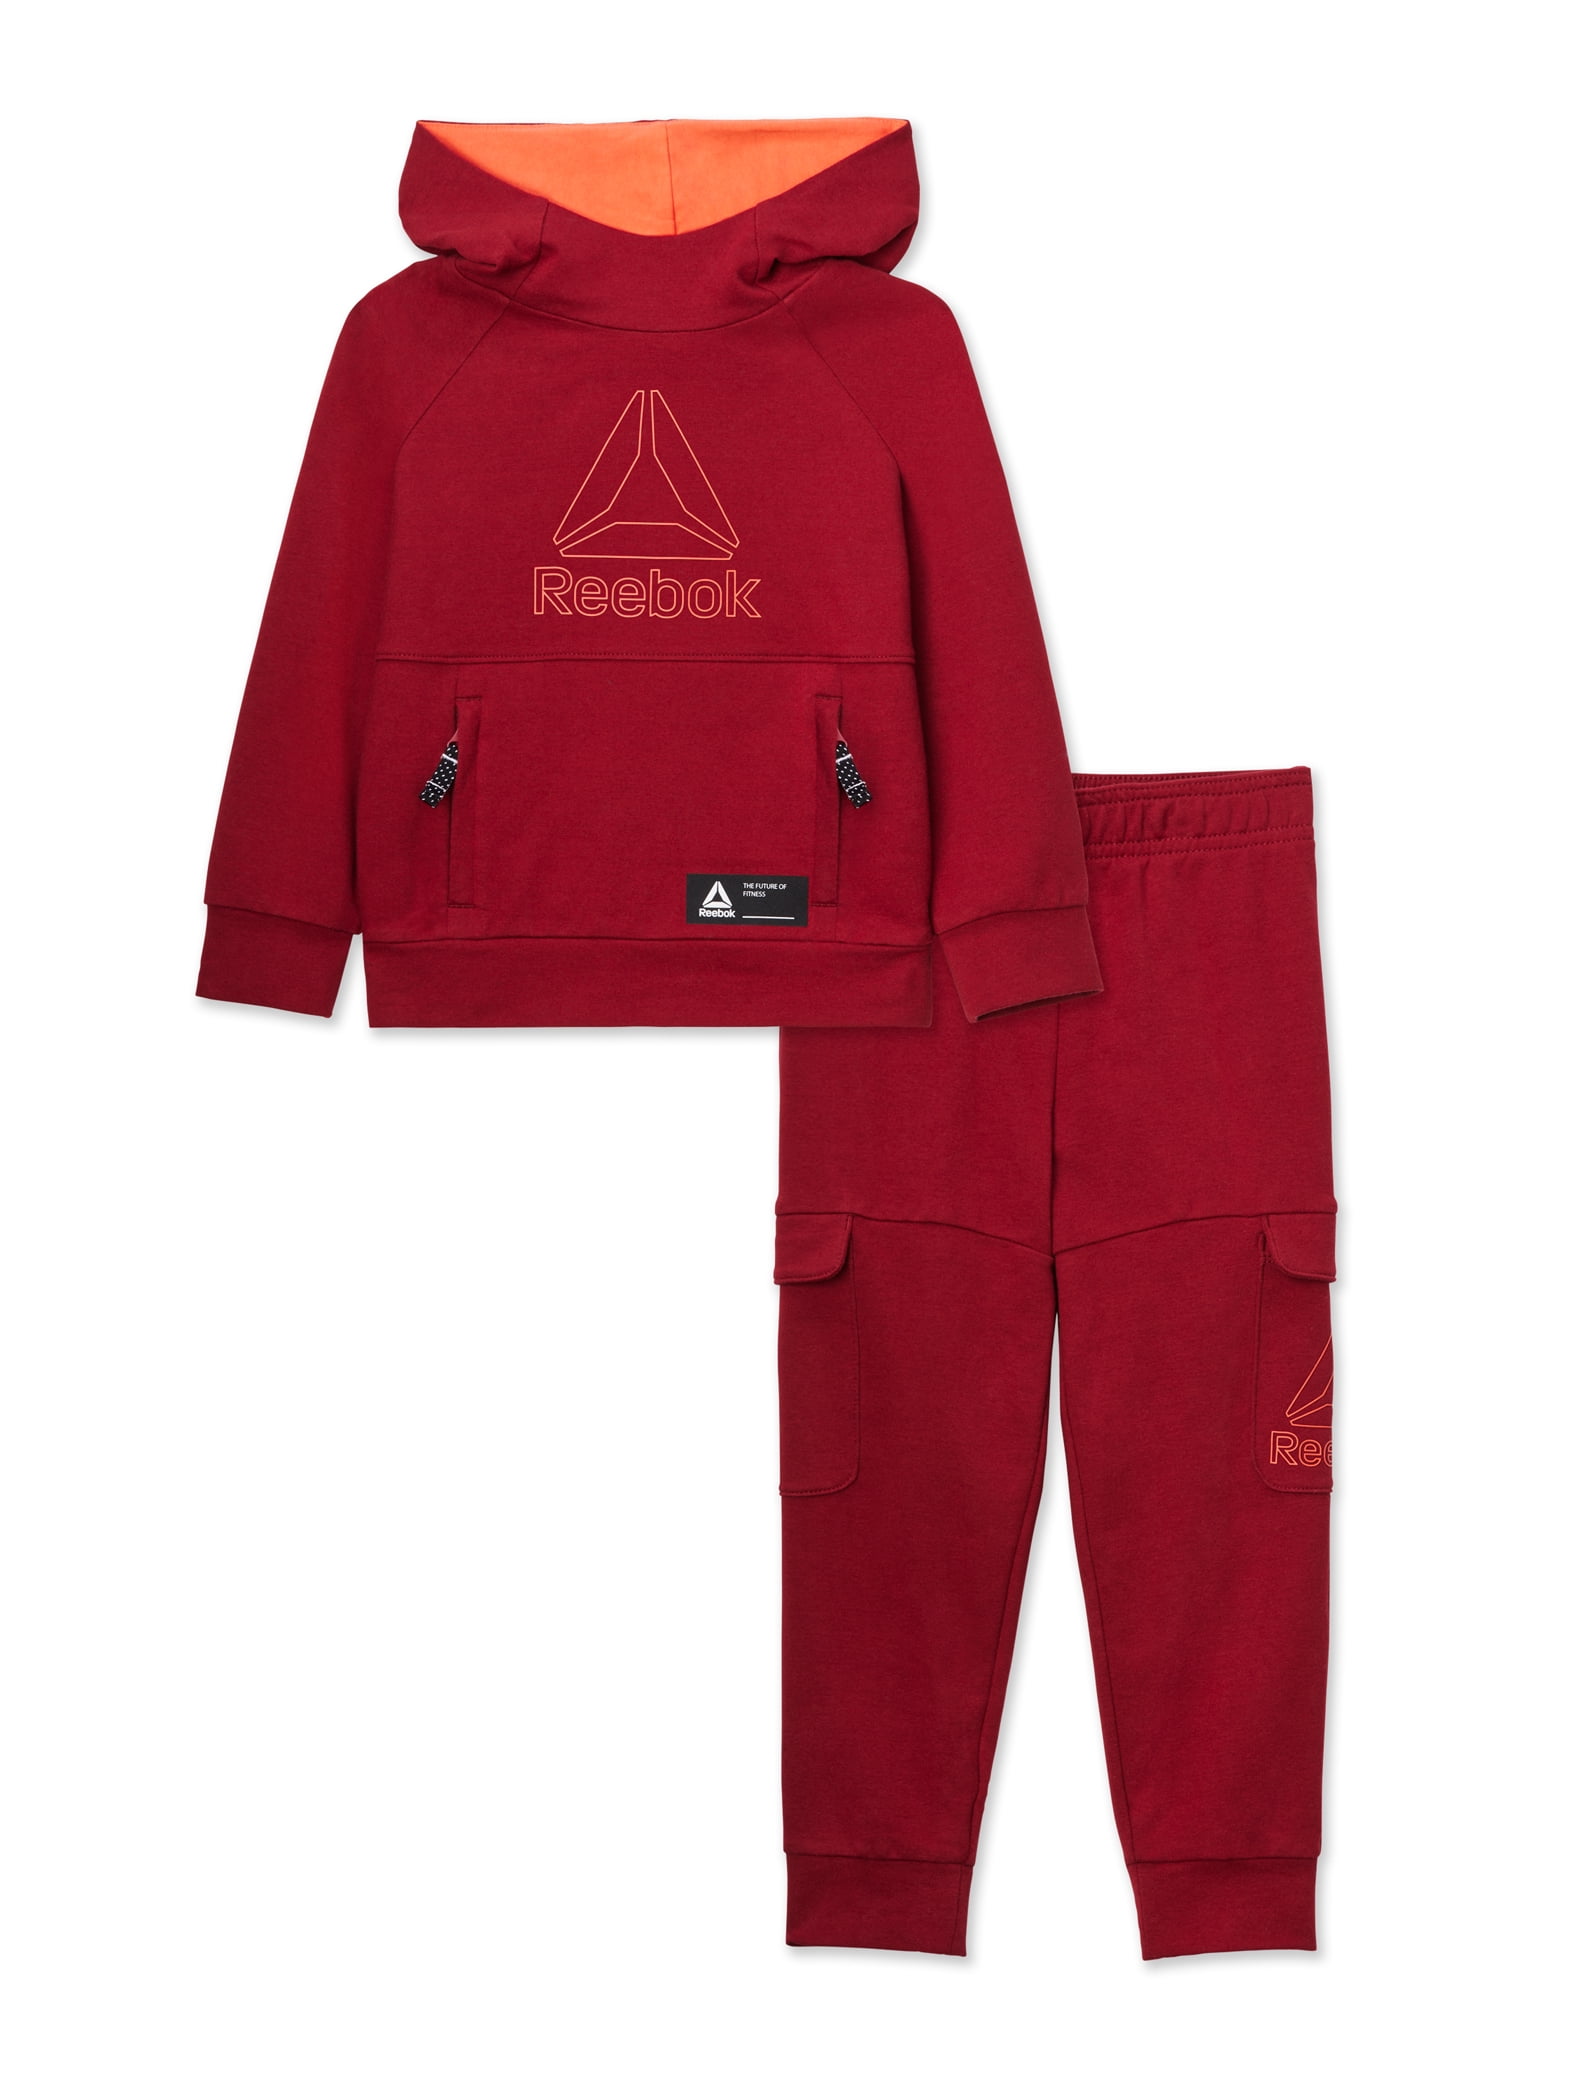 Reebok Toddler Boy Pullover Hoodie and Jogger Pants Outfit Set, 2